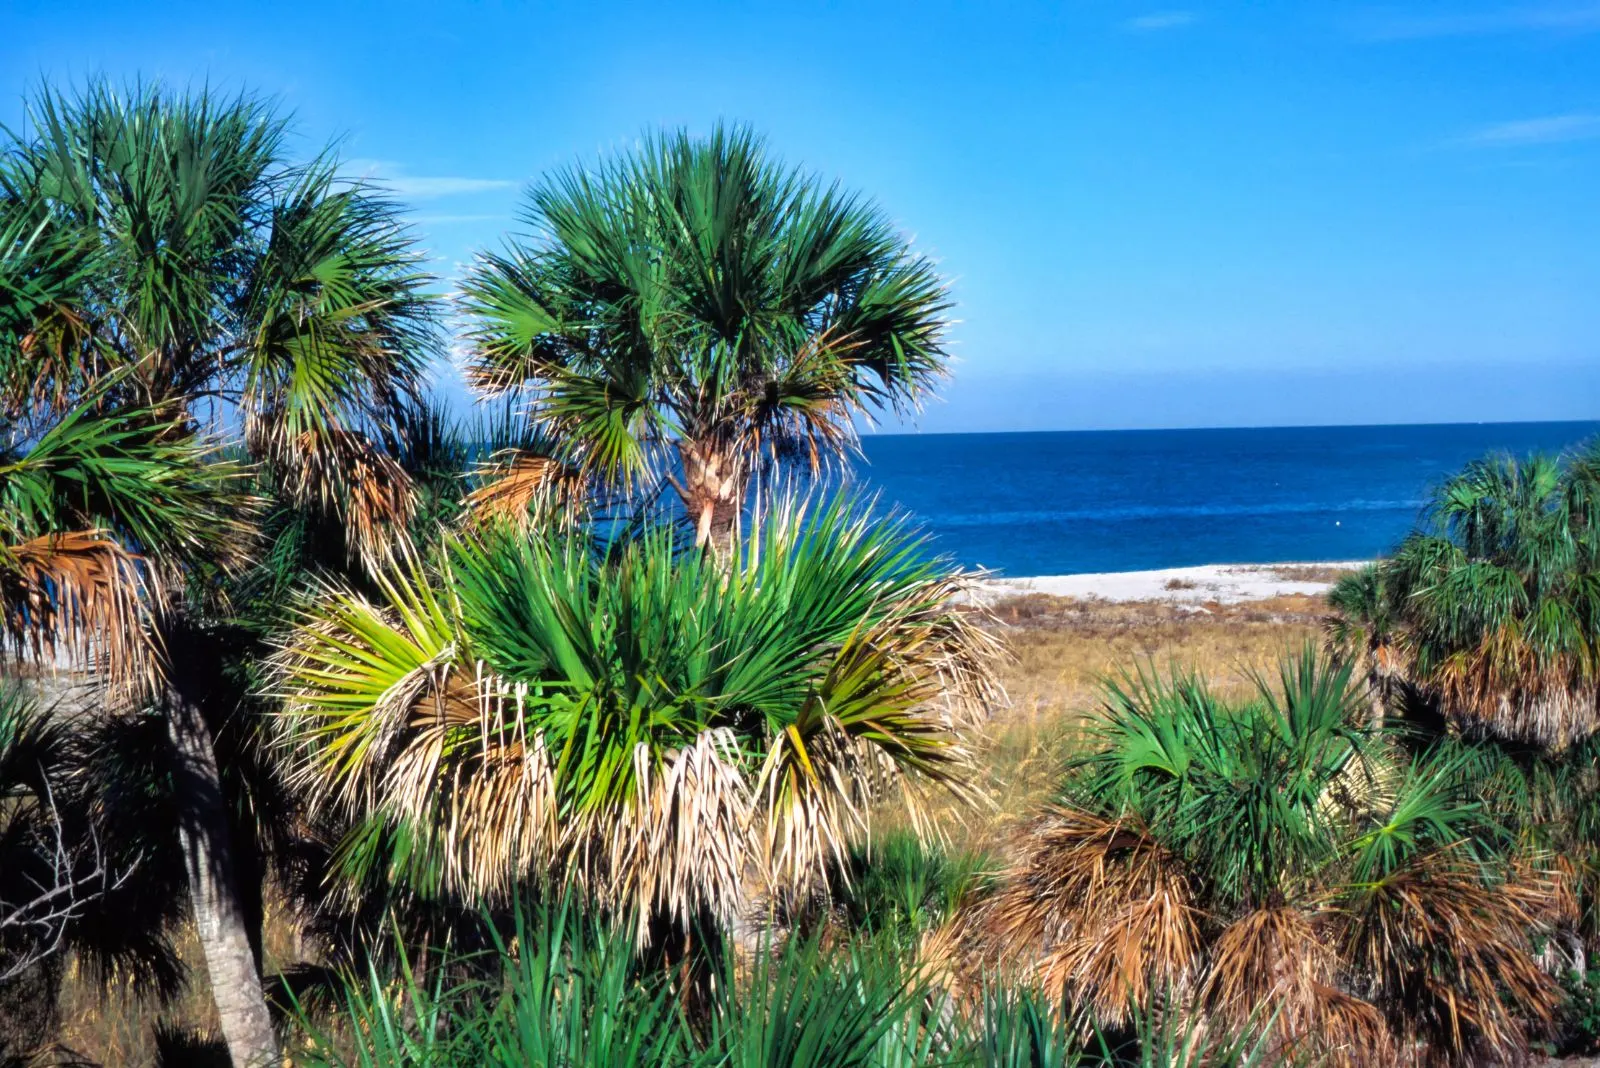 Cabbage Palm on the island